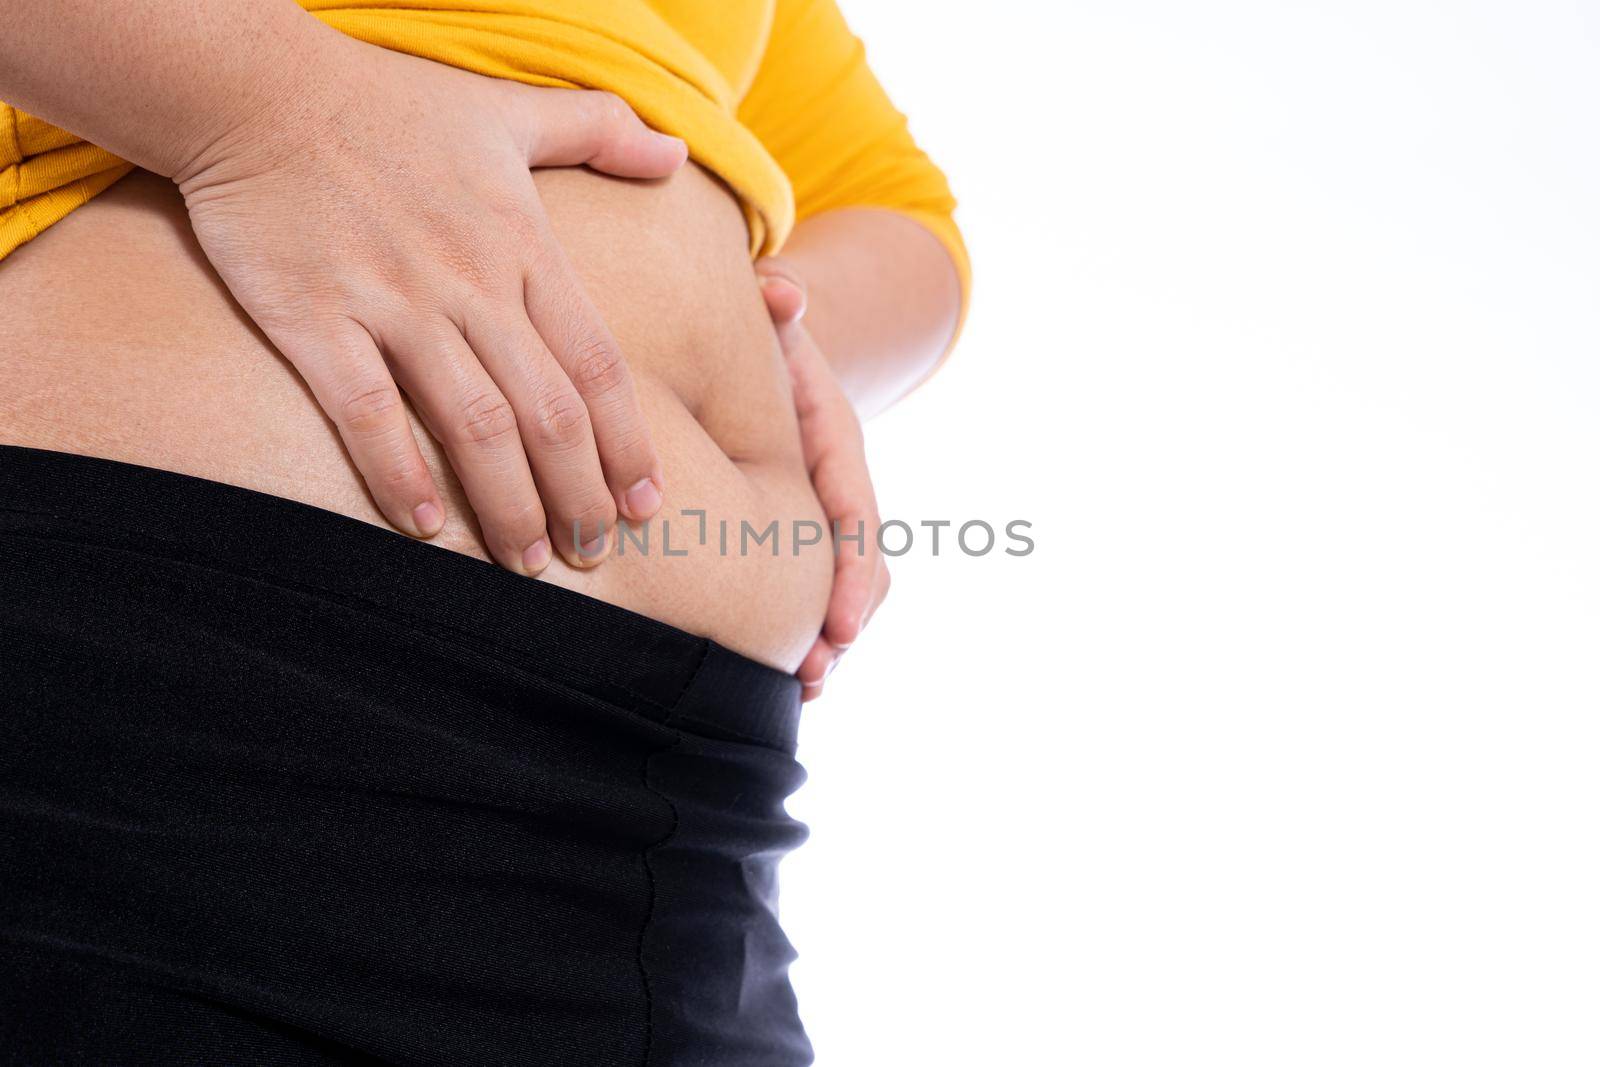 Fat woman holding excessive fat belly, overweight fatty belly isolated white background. Diet lifestyle, weight loss, stomach muscle, healthy concept. by mikesaran